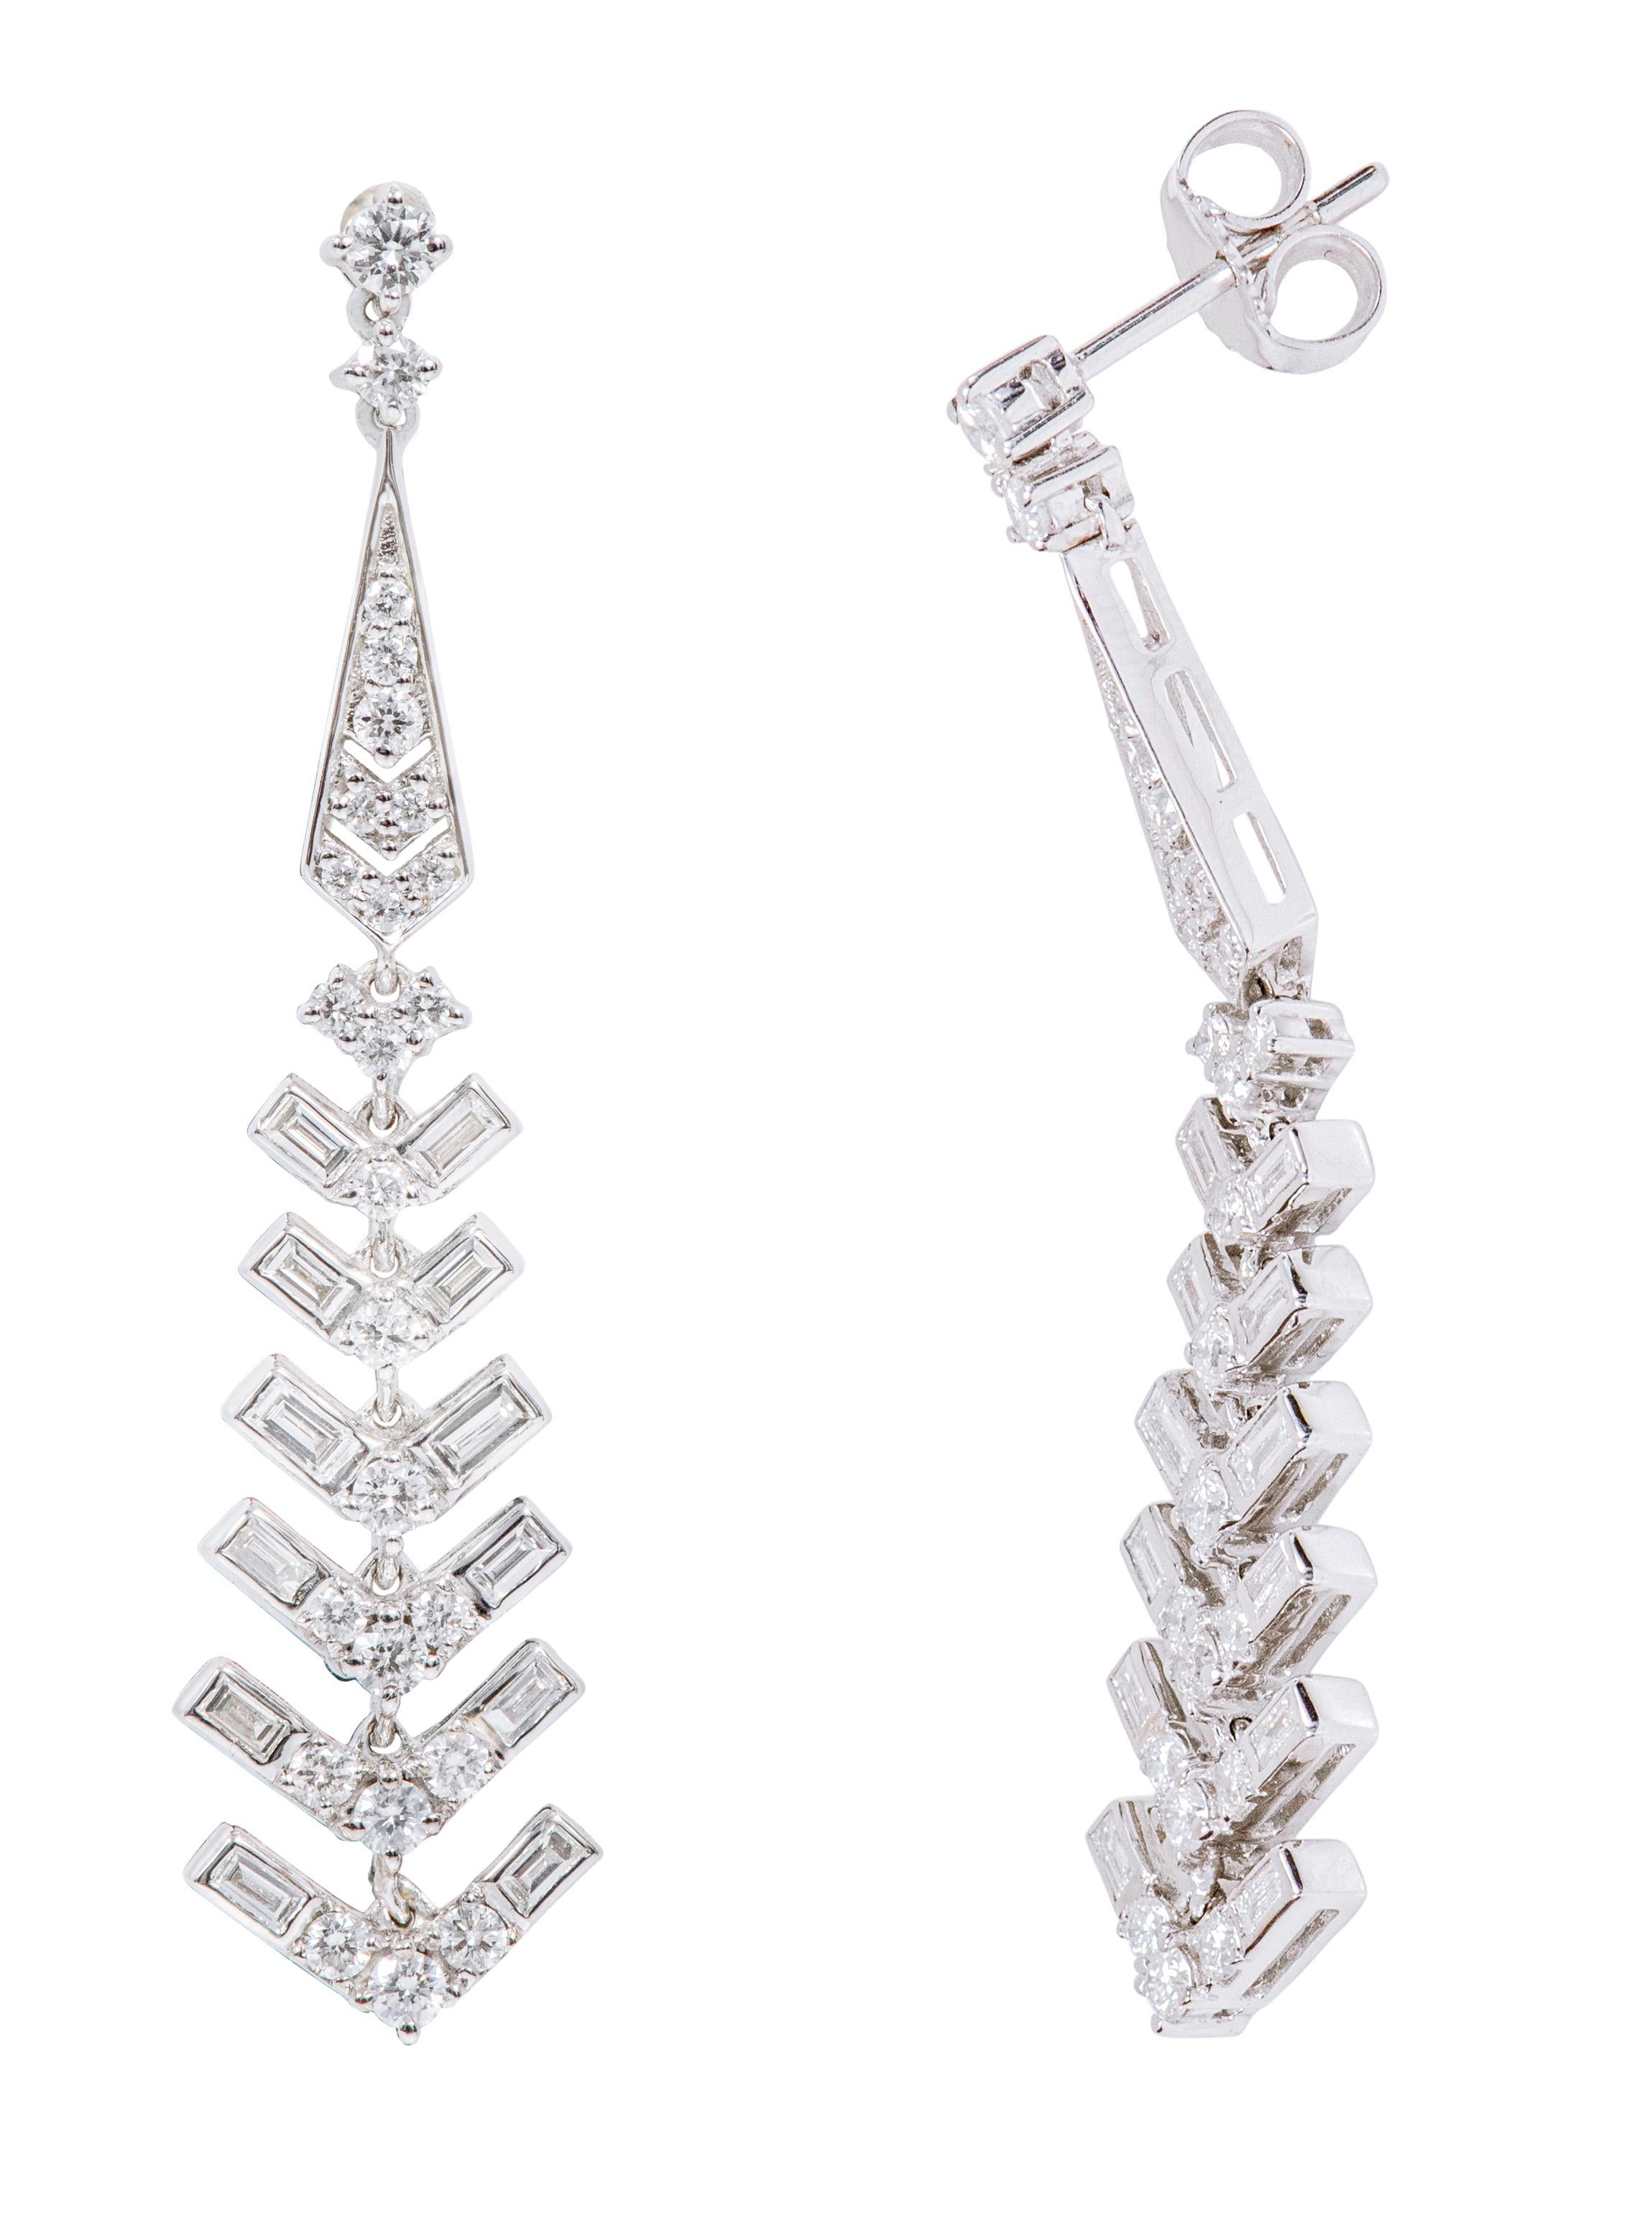 18 Karat White Gold 1.50 Carat Diamond Dangle Earrings

This exclusive round and baguette diamond tie shaped long earring is phenomenal. The graduating tie shape formed with 4-prong set round diamond solitaire in the center and channel set solitaire